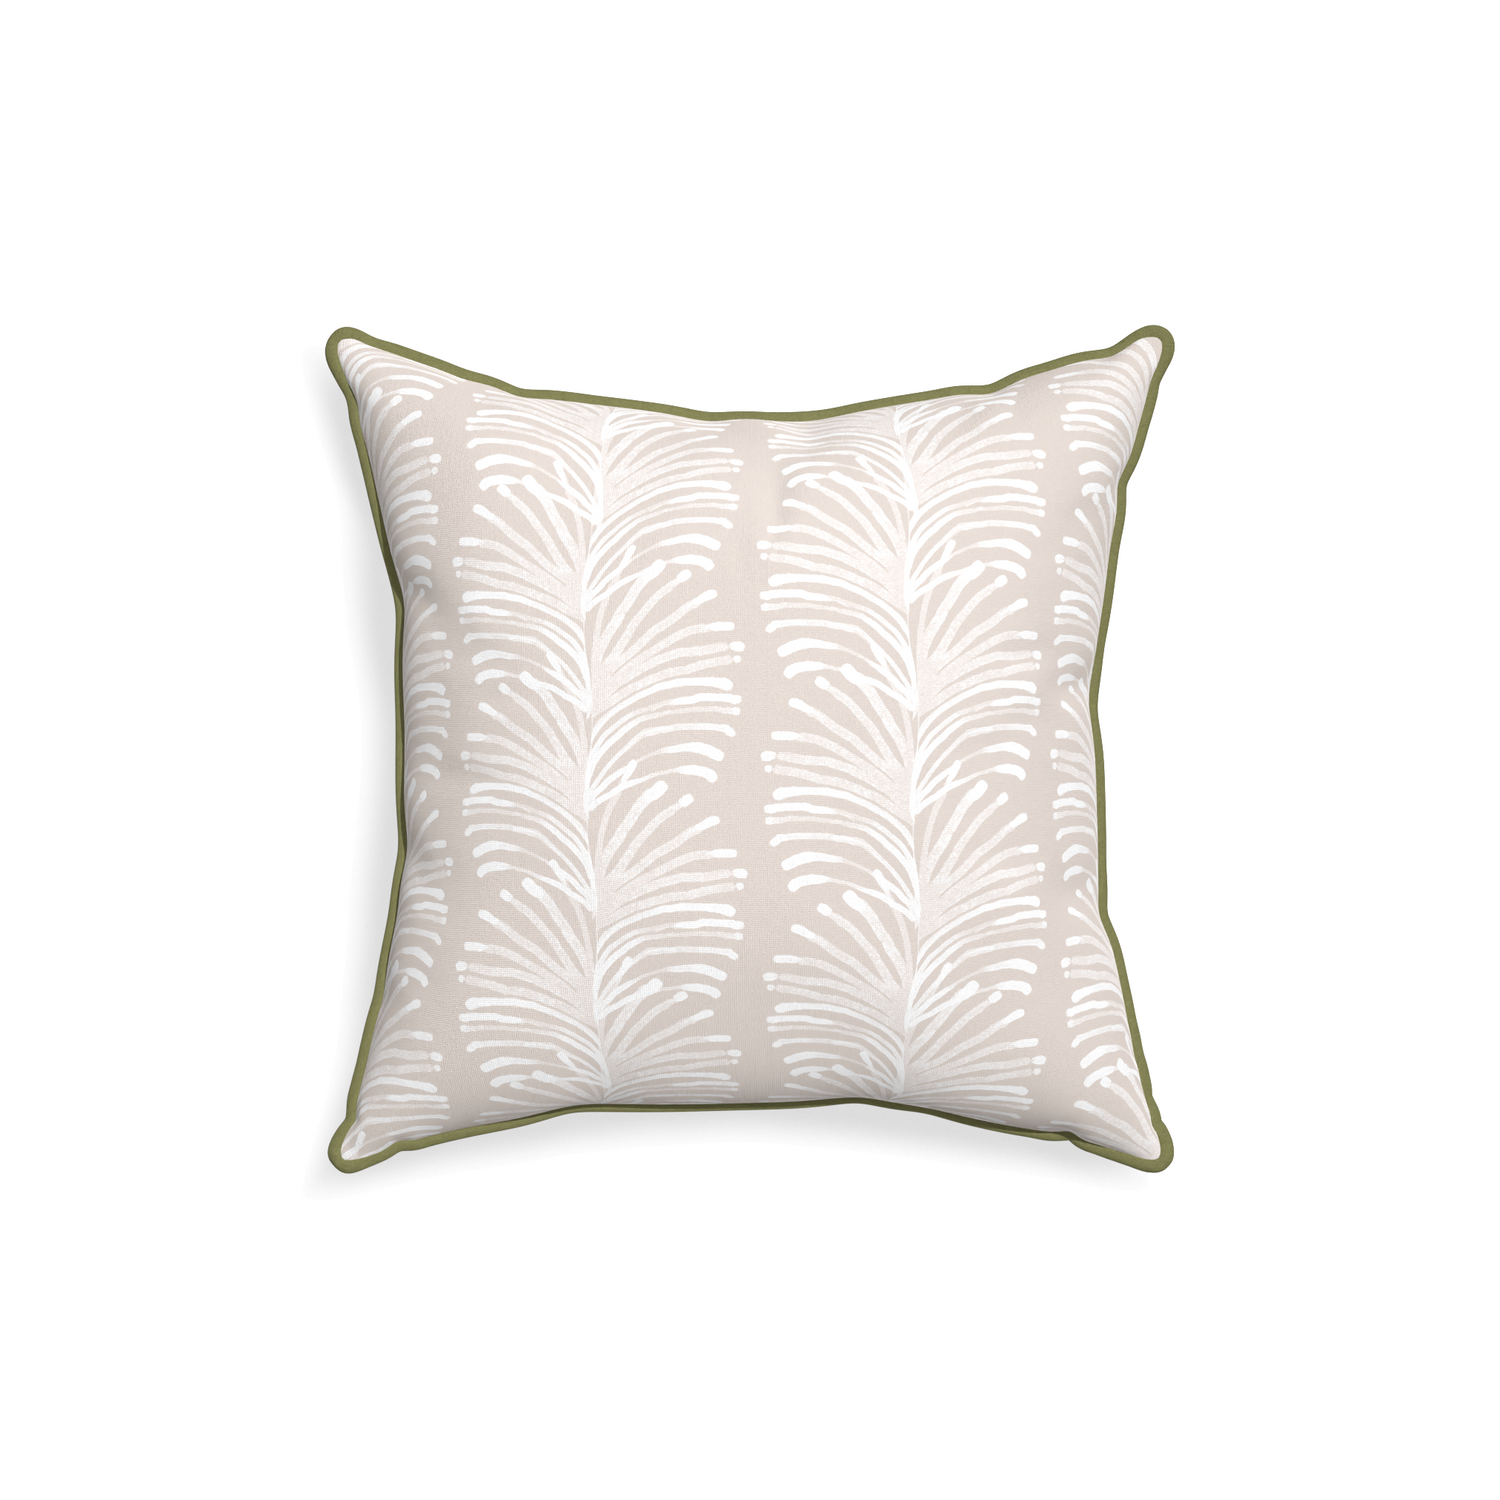 18-square emma sand custom pillow with moss piping on white background